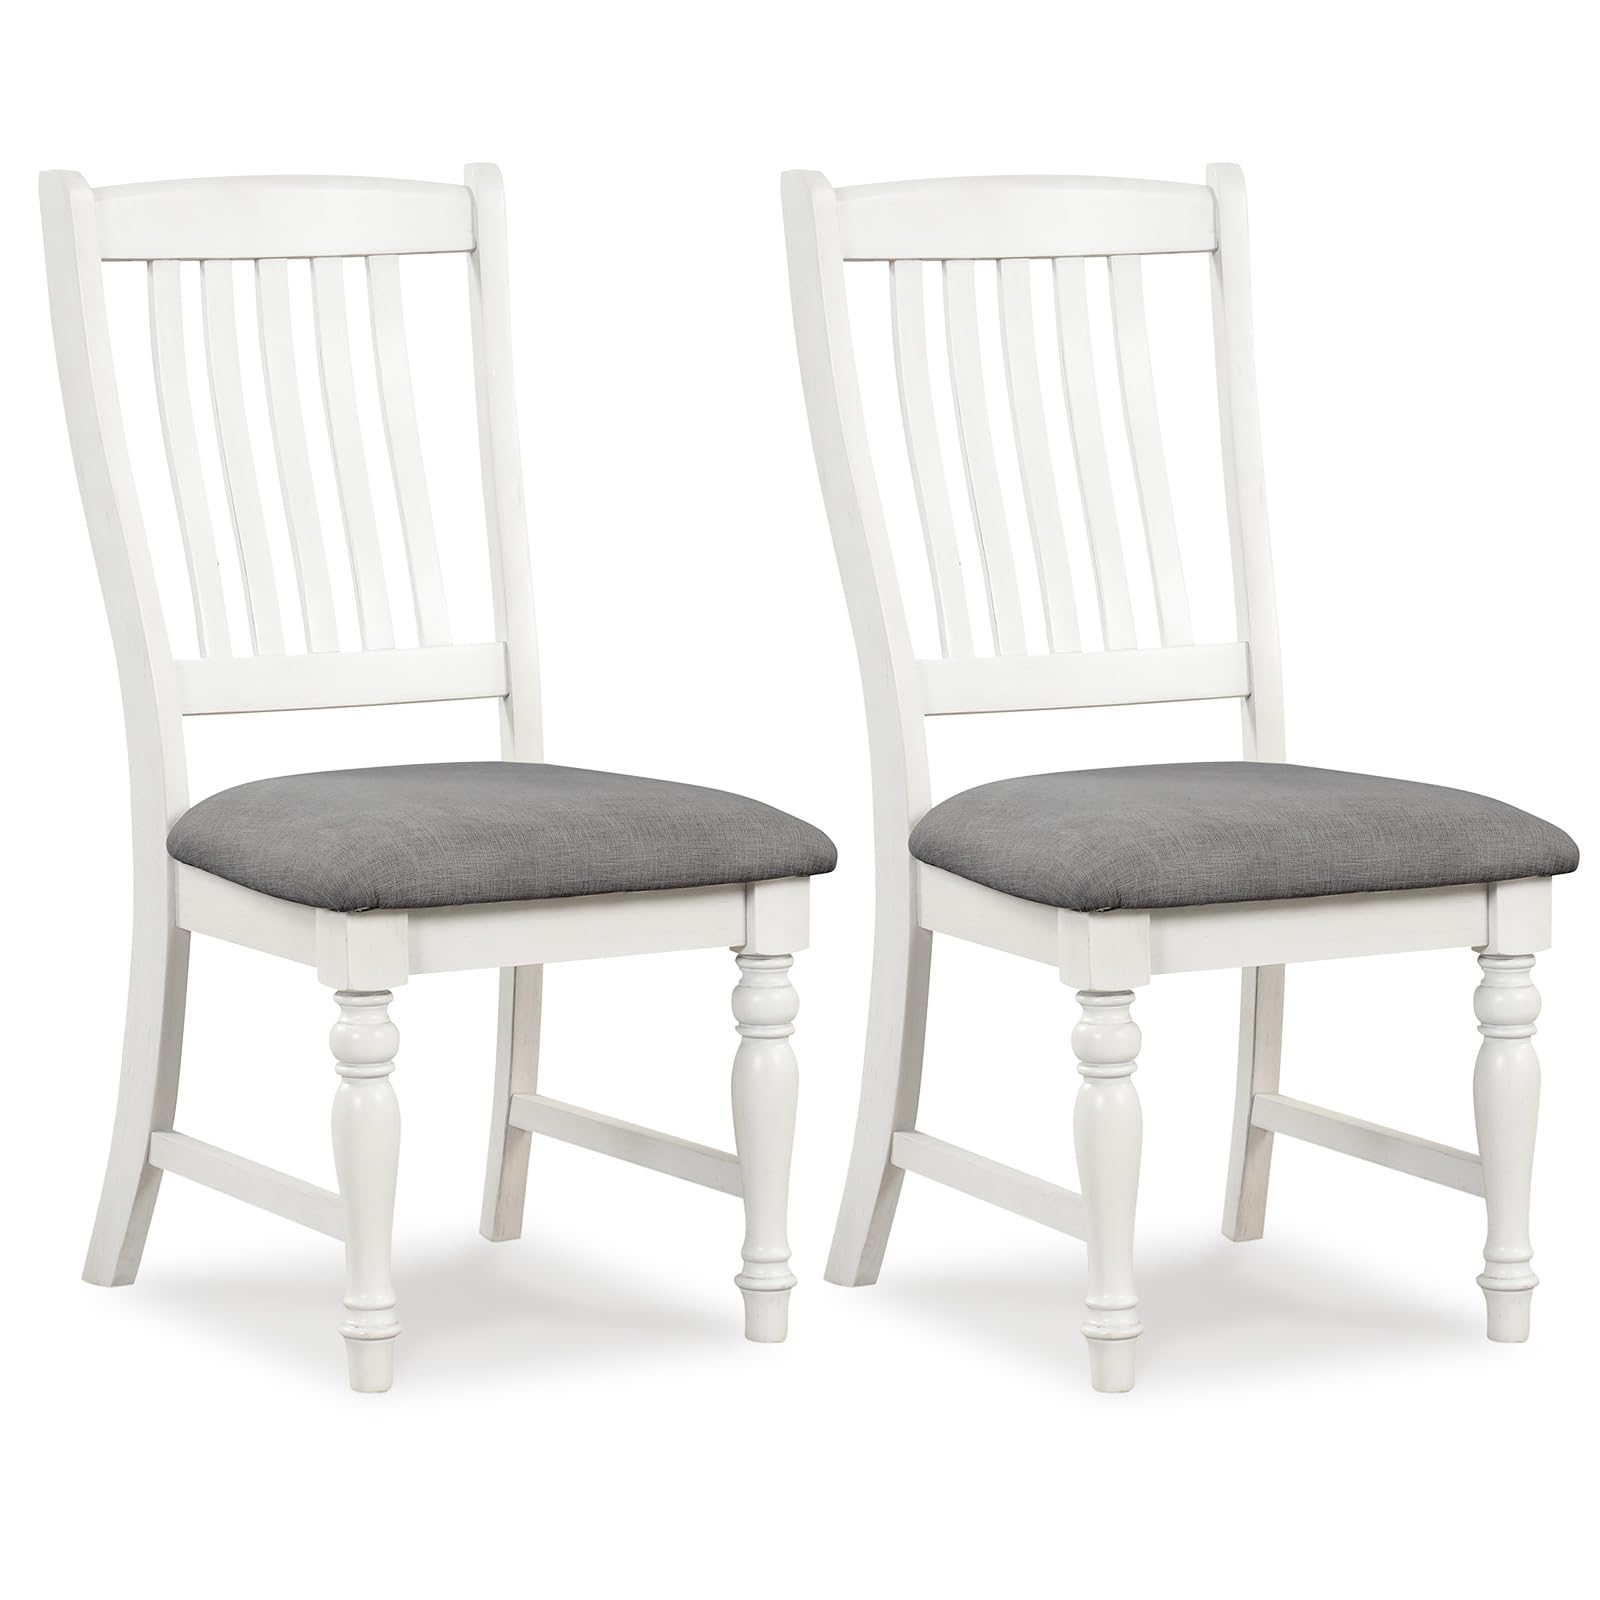 Giantex Wood Dining Chairs Set of 2, Farmhouse Kitchen Chairs with Solid Wood Frame, Max Load 355 Lbs